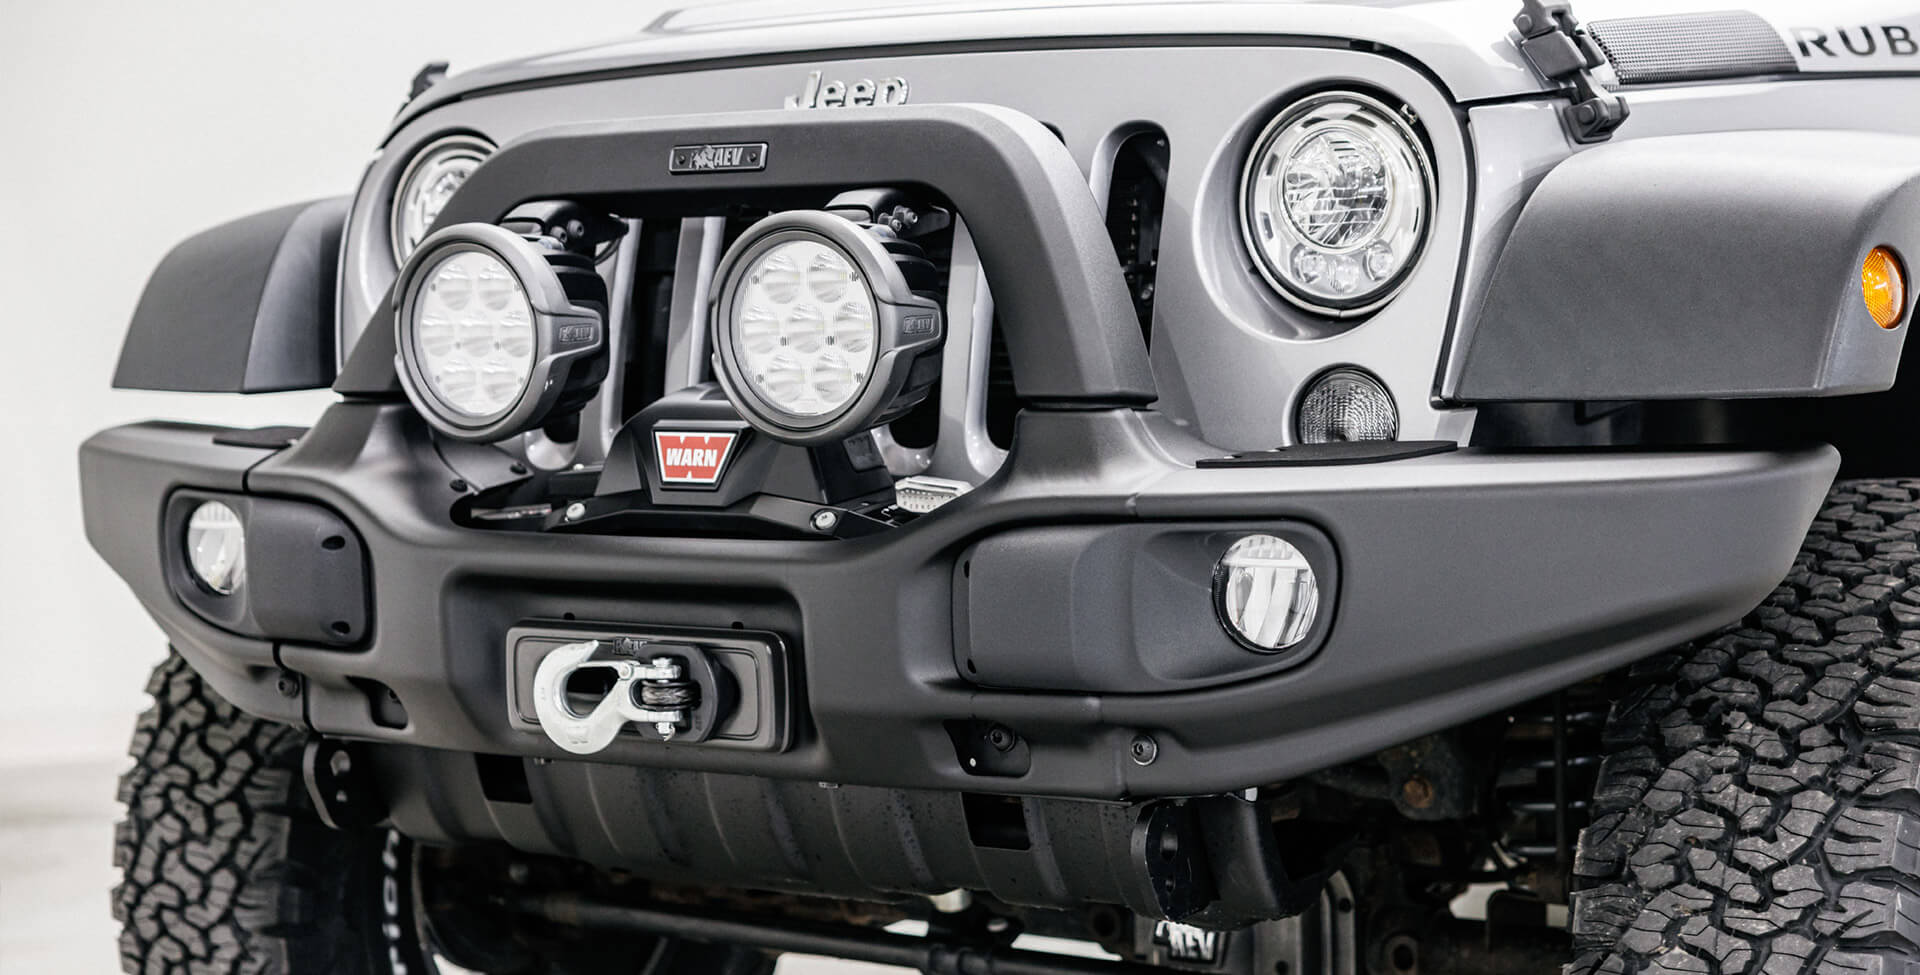 EX/RX Front Bumper for JK Wrangler - American Expedition Vehicles